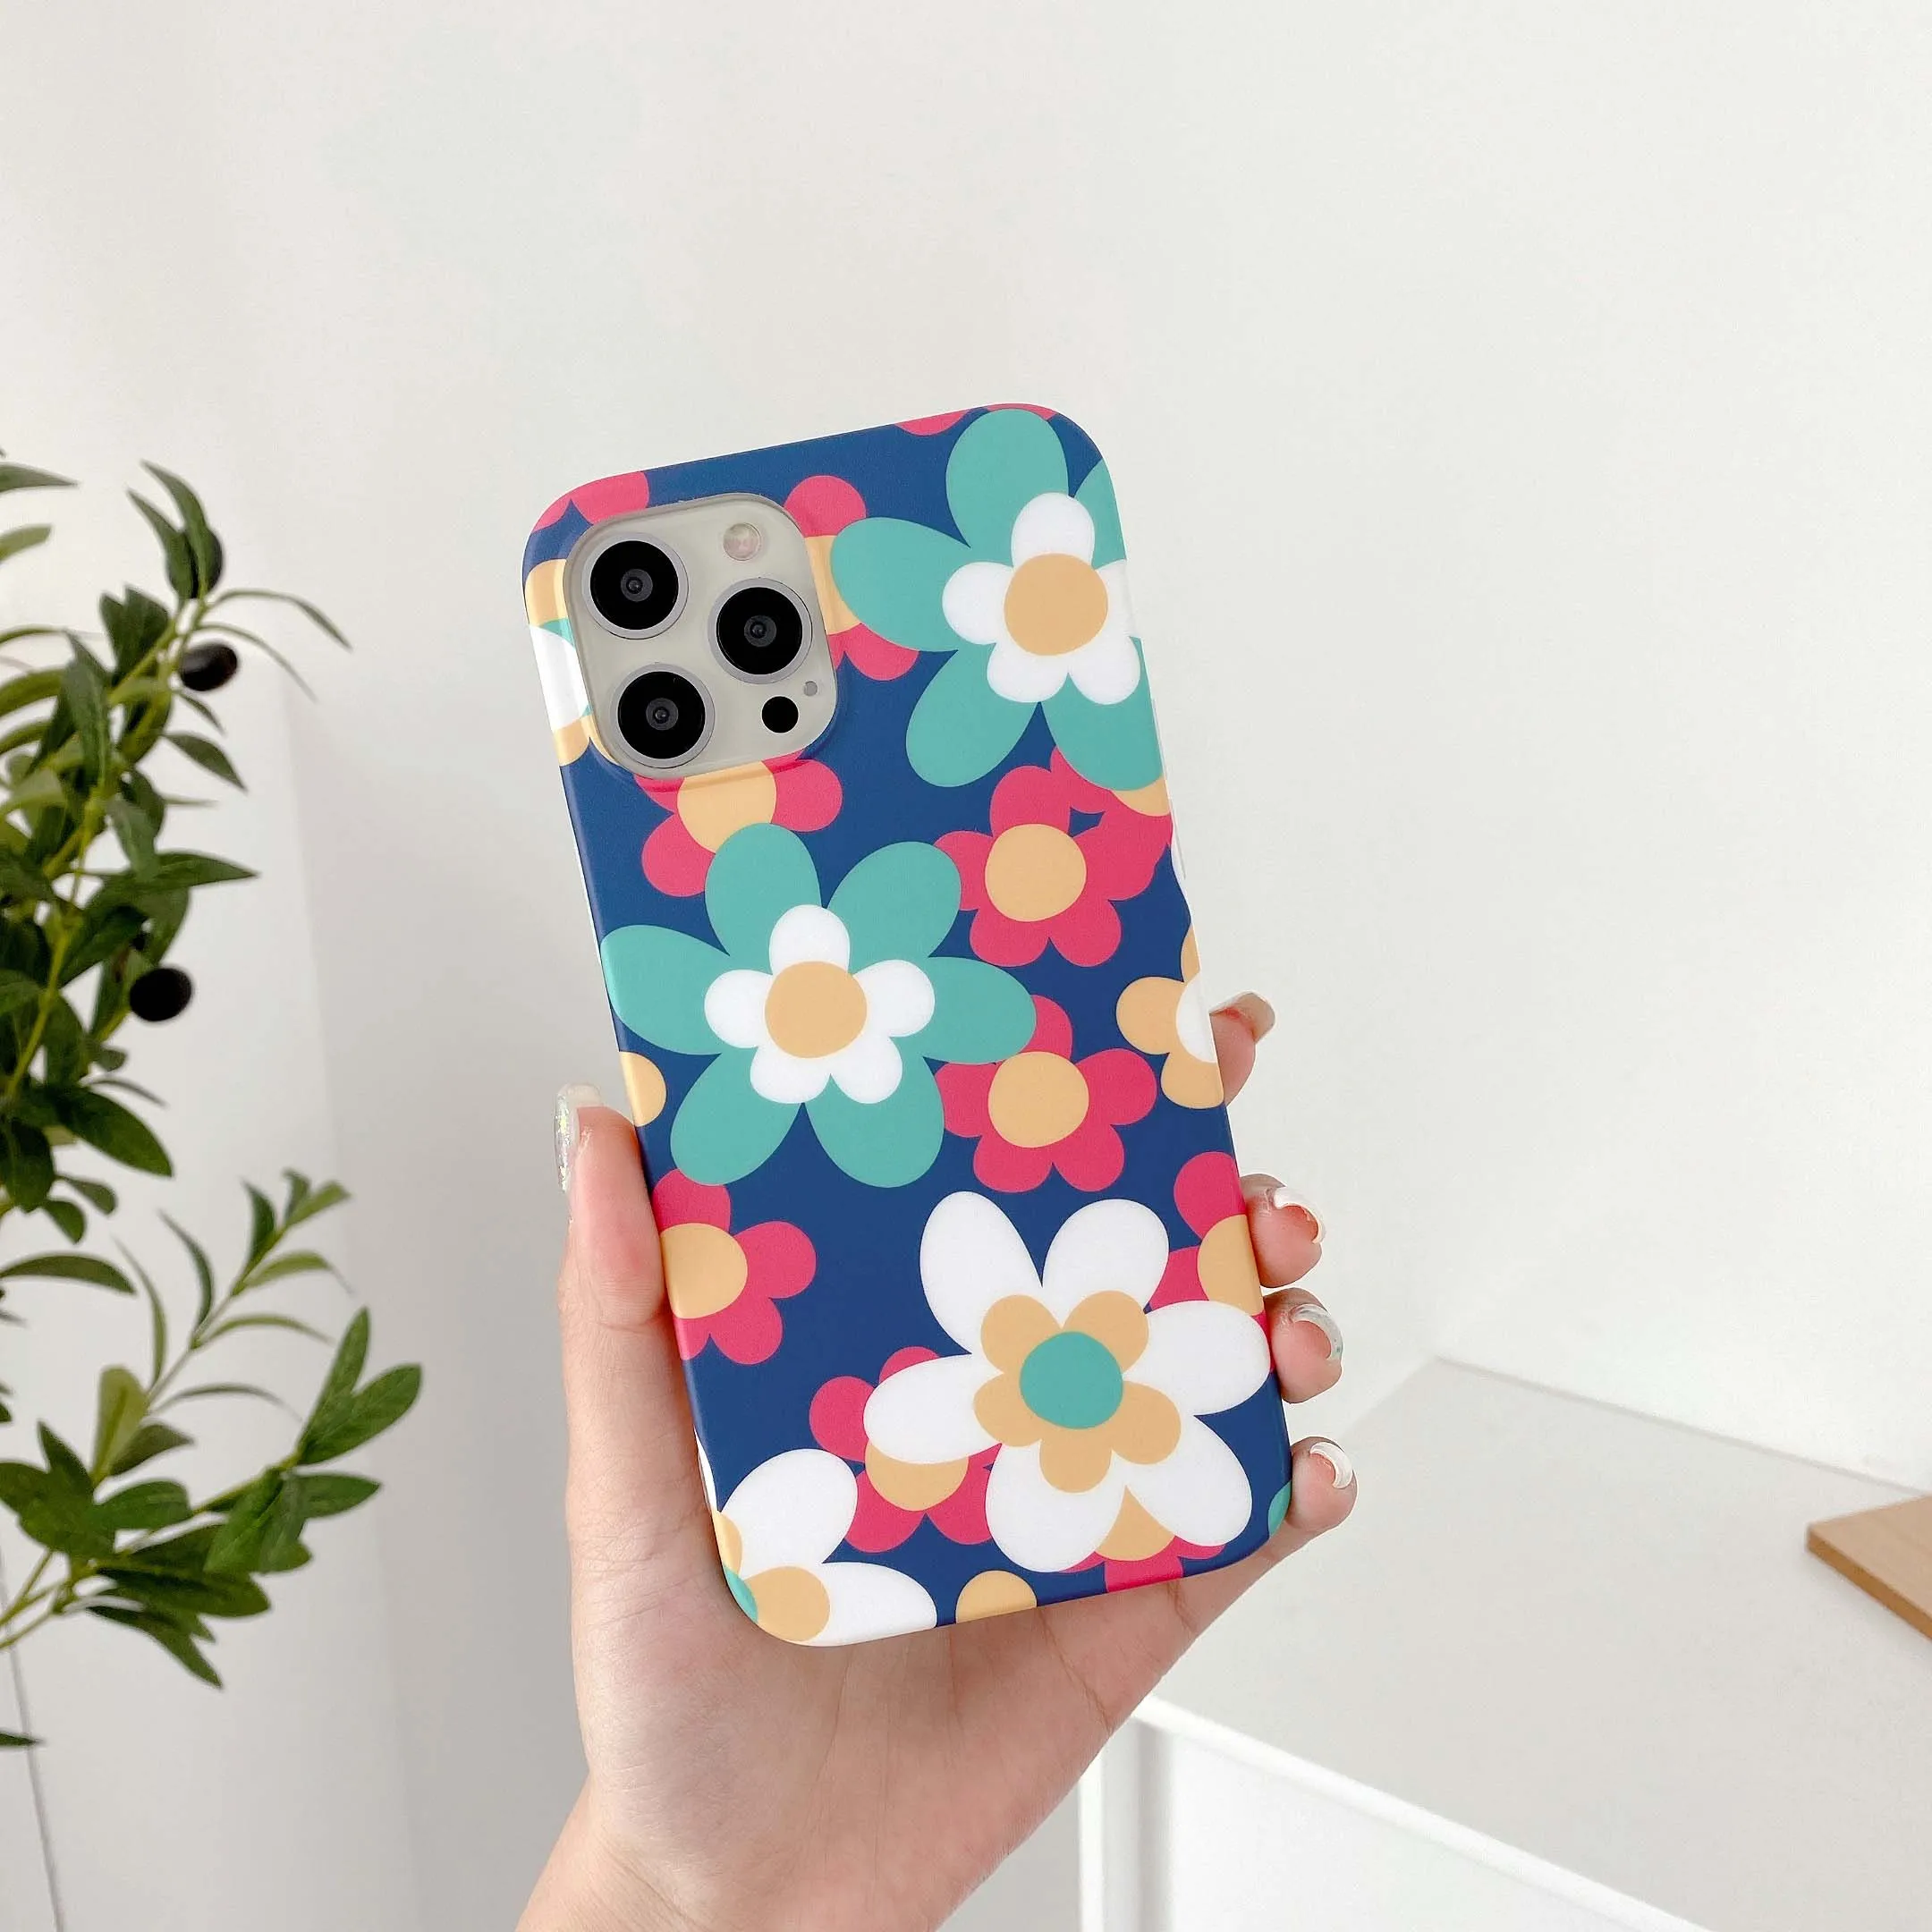 iphone 12 pro max wallet case Cute Smooth Flower Phone Case for iPhone 13 11 Pro Max 12 Mini X XR XS Max Se 2020 7 8 Plus Anti Knock Back Phone Cover Case iphone 12 pro max case